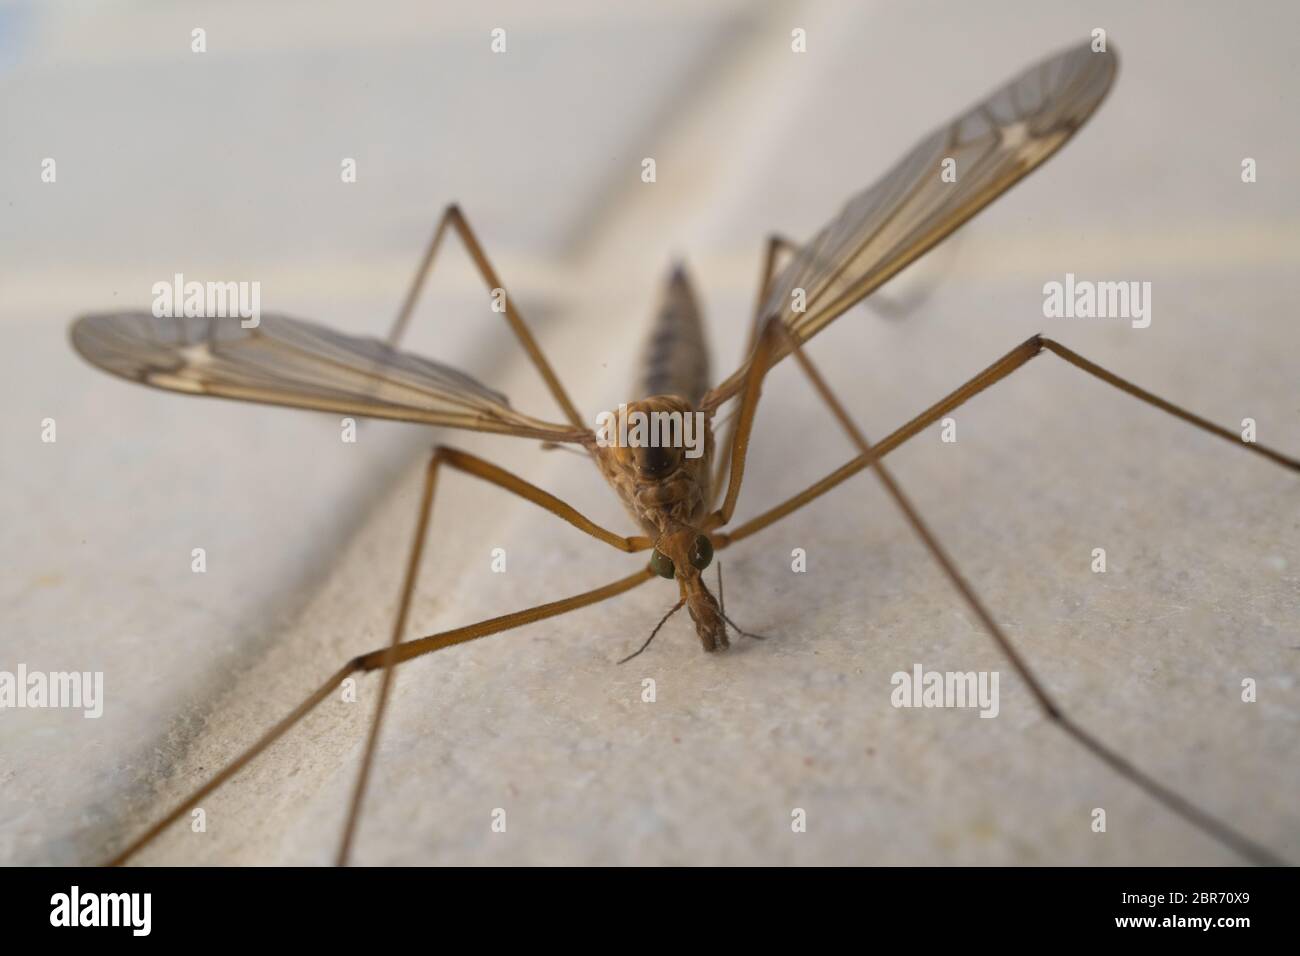 Crane fly is a common name referring to any member of the insect family Tipulidae, of the order Diptera, true flies in the superfamily Tipuloidea Stock Photo